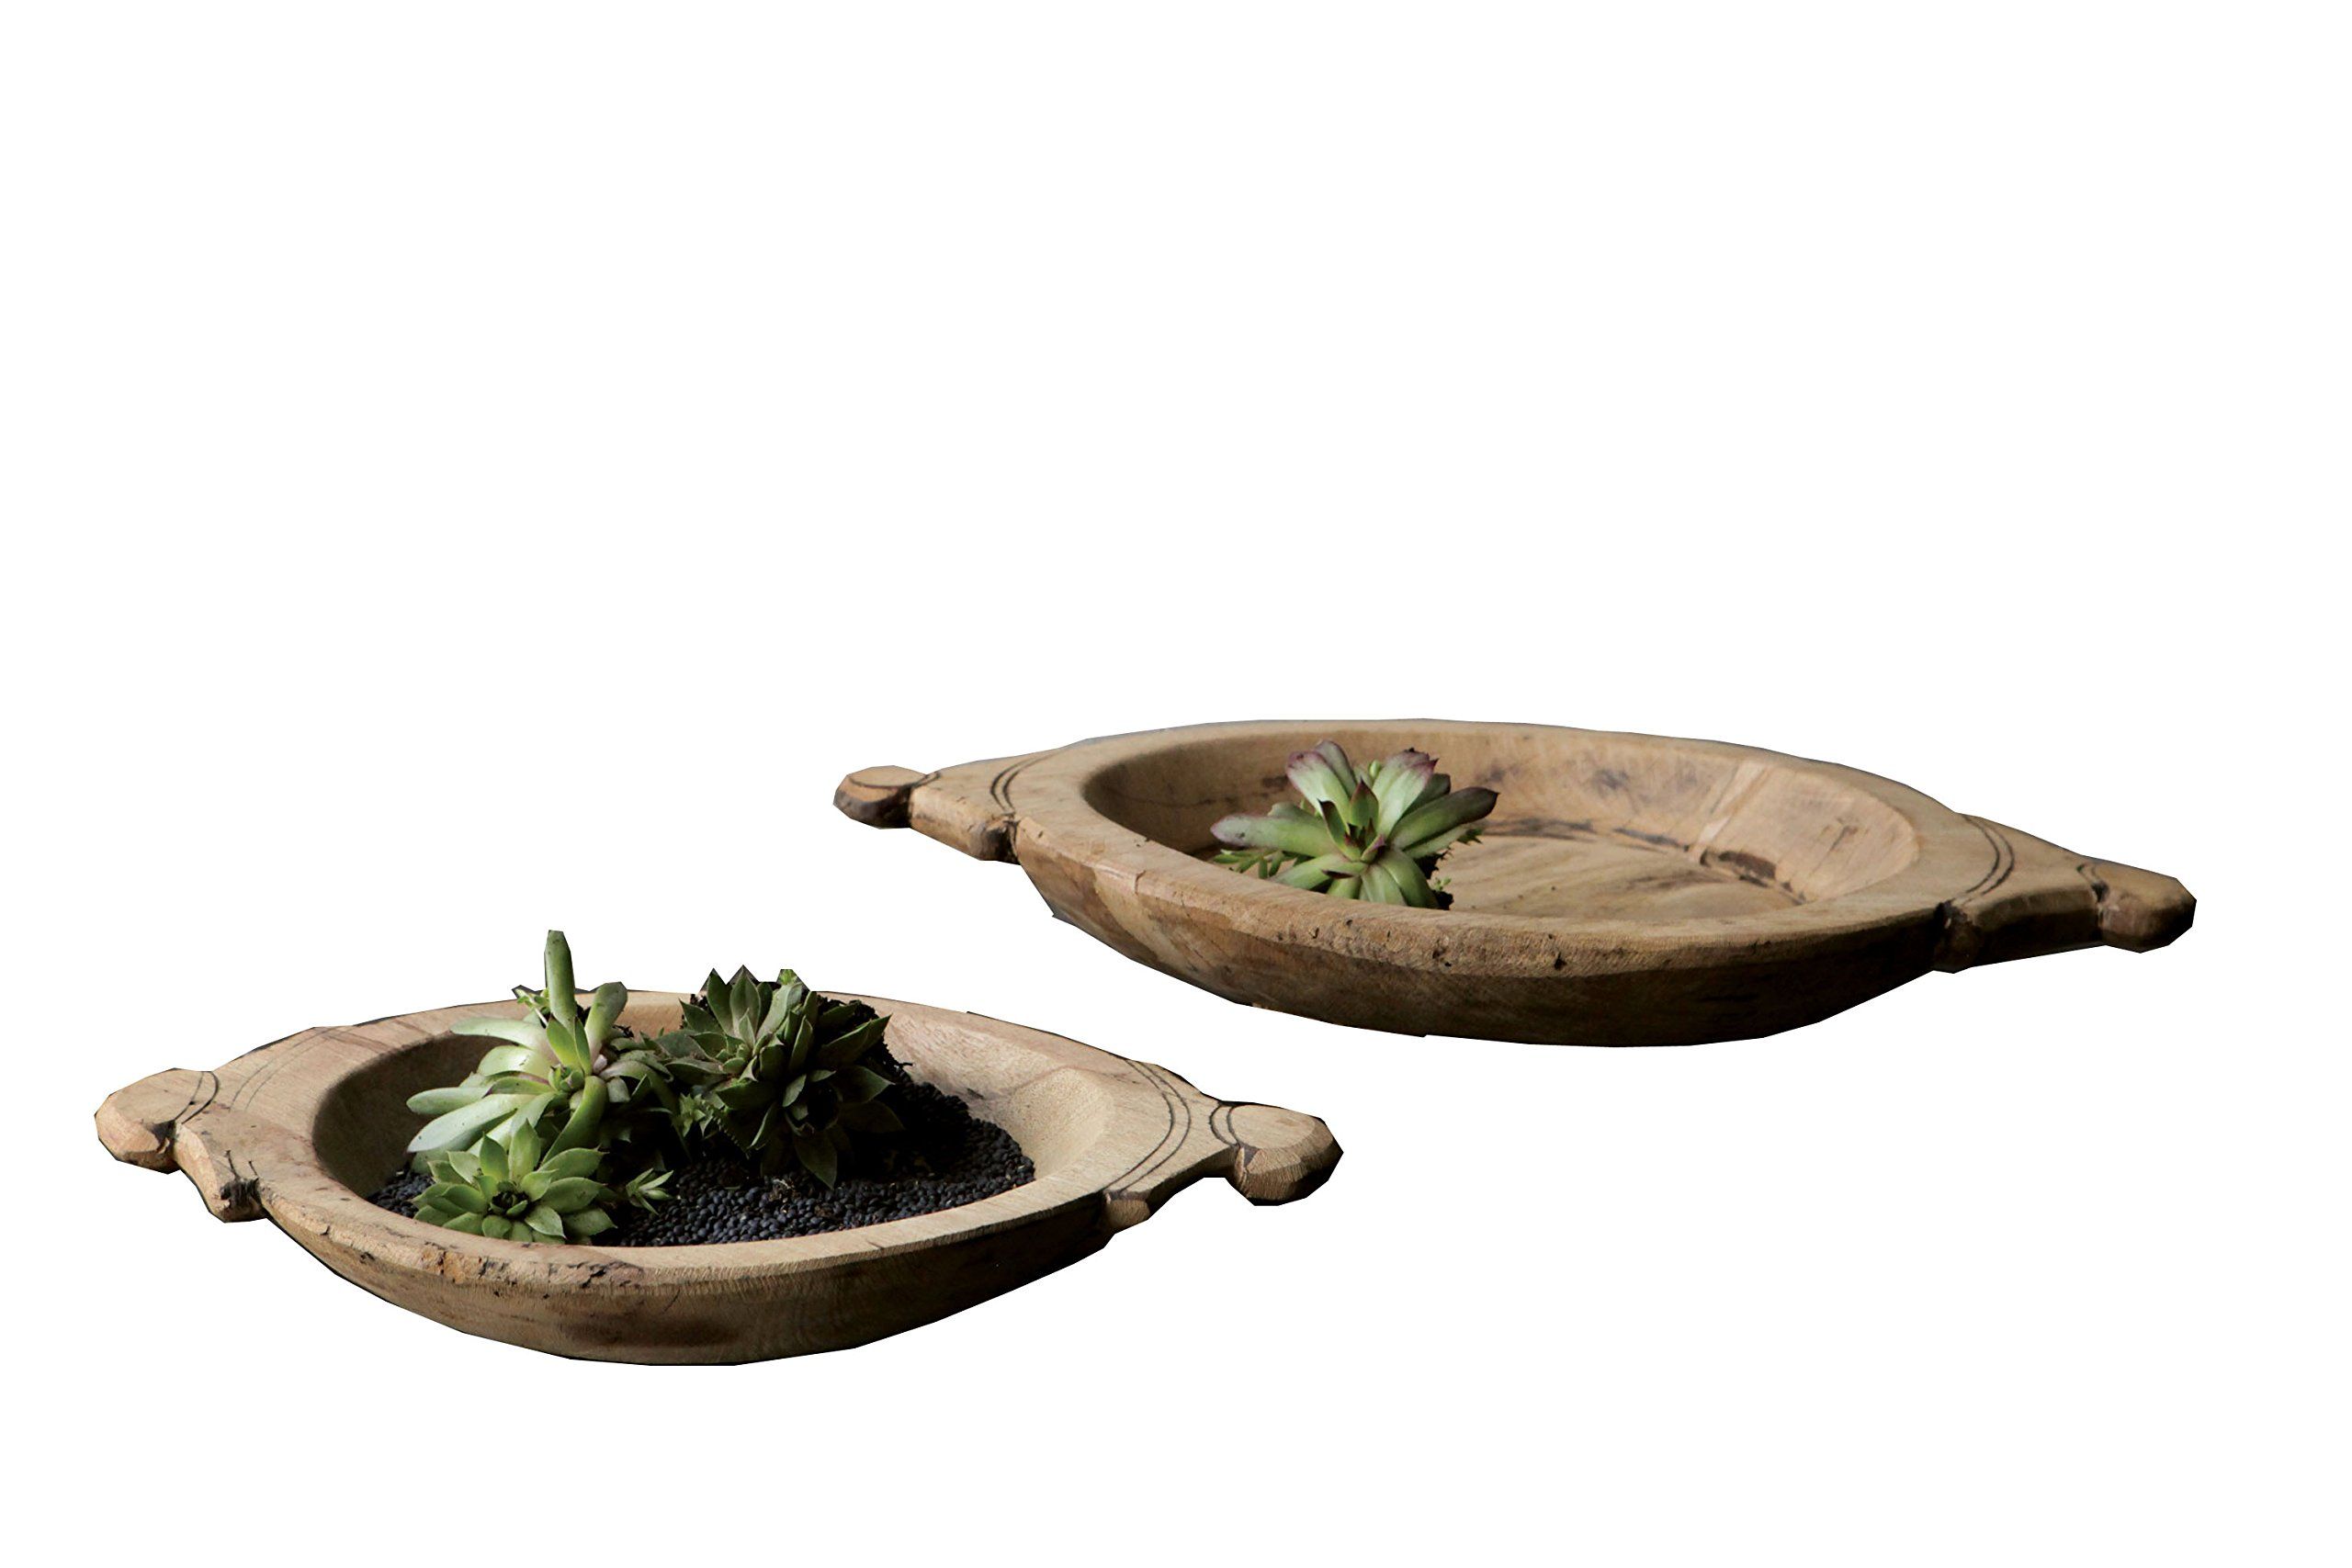 Creative Co-Op Set of 2 Hand Carved Wood Bowls | Amazon (US)